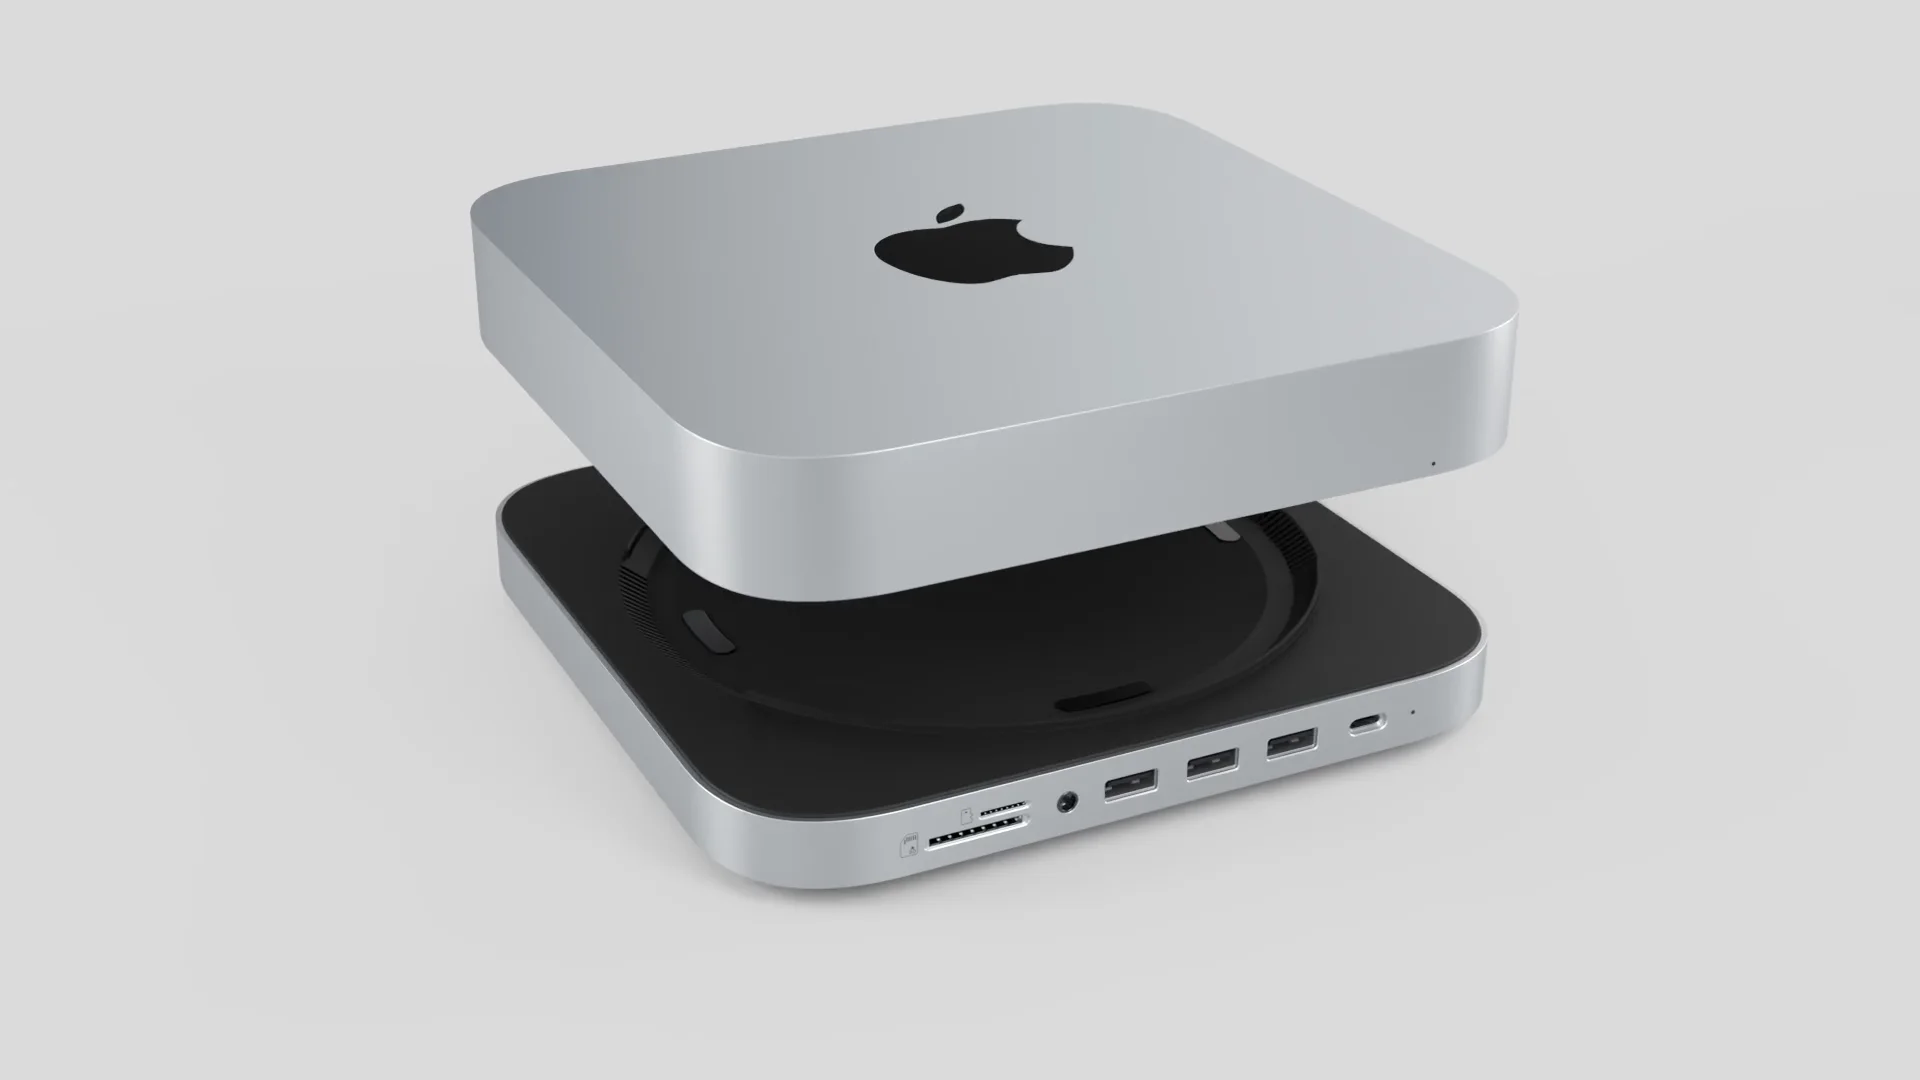 Stand & Hub for Mac Mini with SSD Enclosure on Vimeo